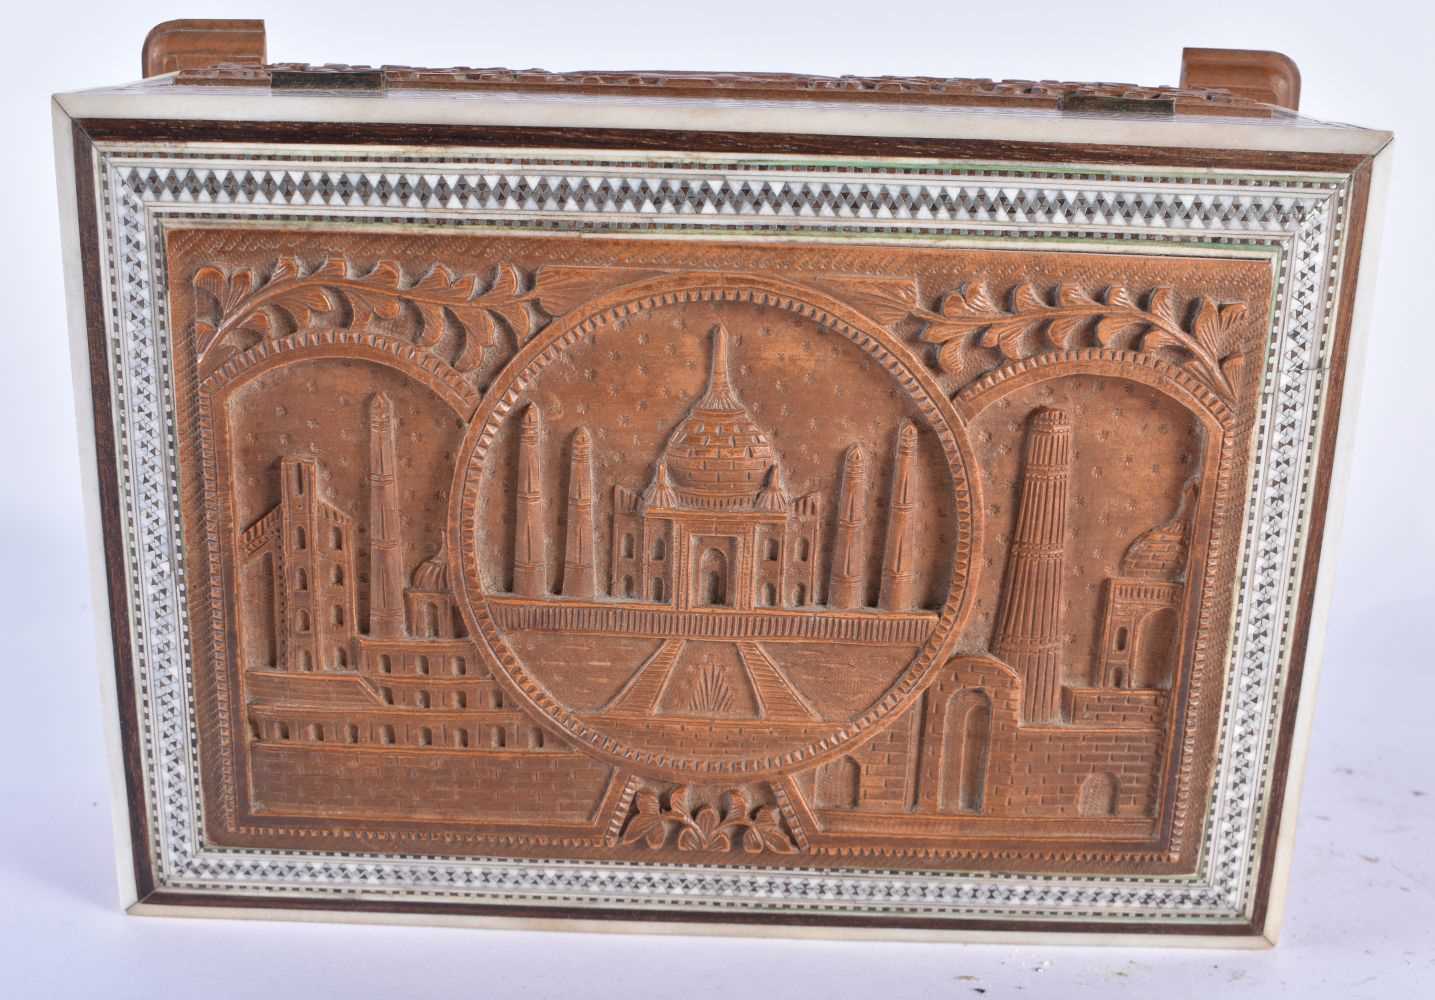 TWO 19TH CENTURY MIDDLE EASTERN ANGLO INDIAN SANDALWOOD AND BONE CASKETS. Largest 24 cm x 14 cm. ( - Image 4 of 8